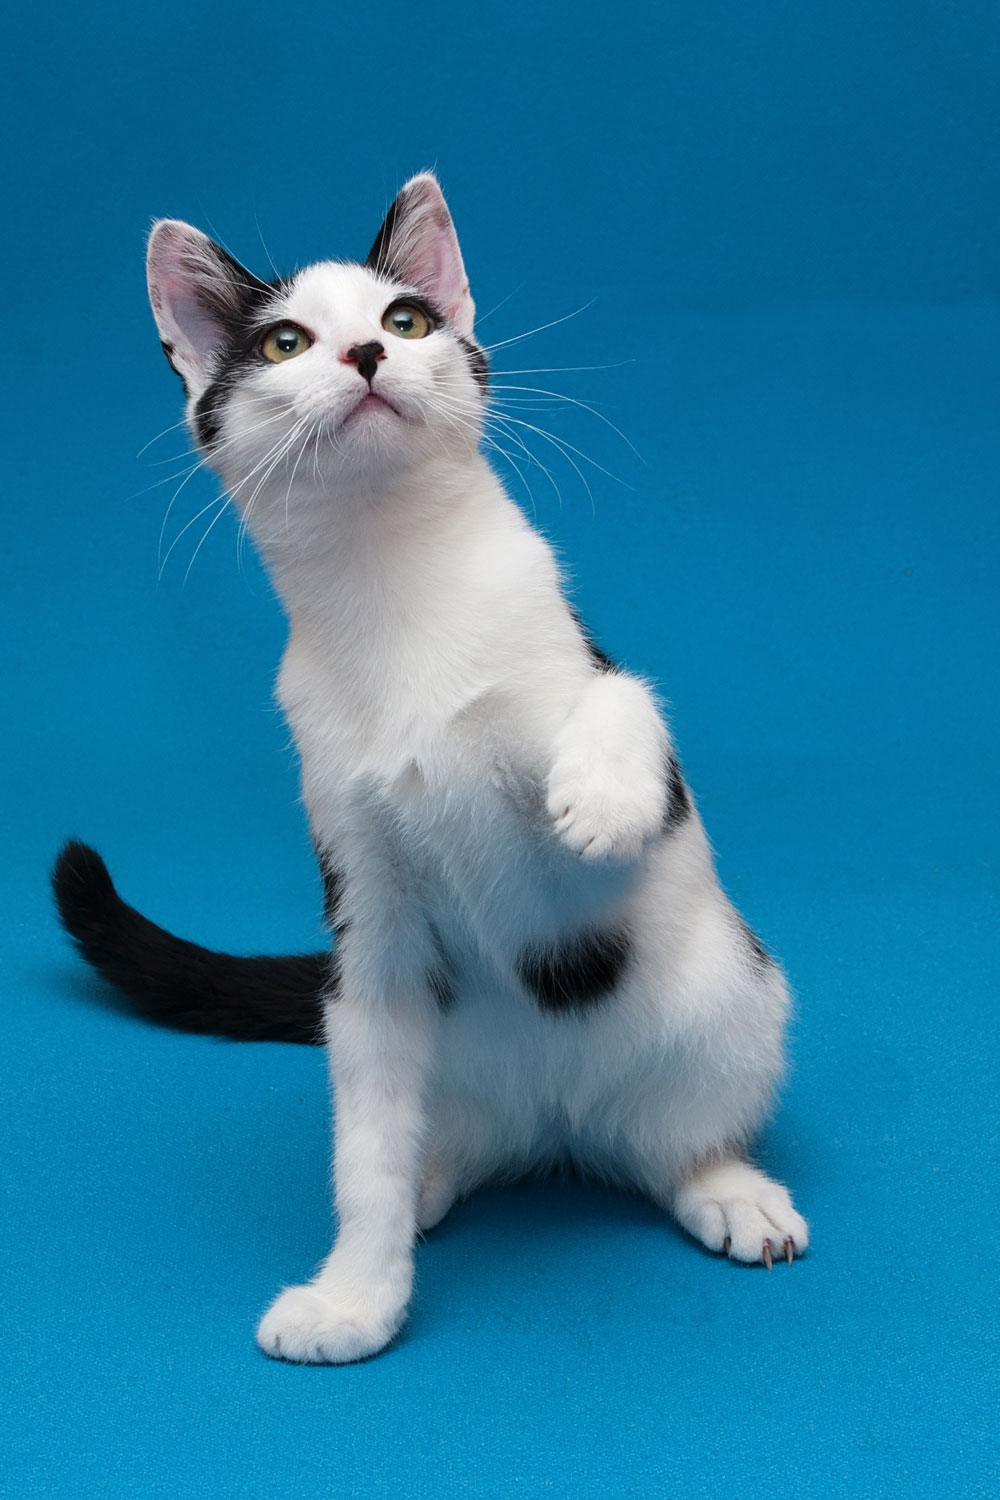 A cute black and white spotted cat sitting on blue background